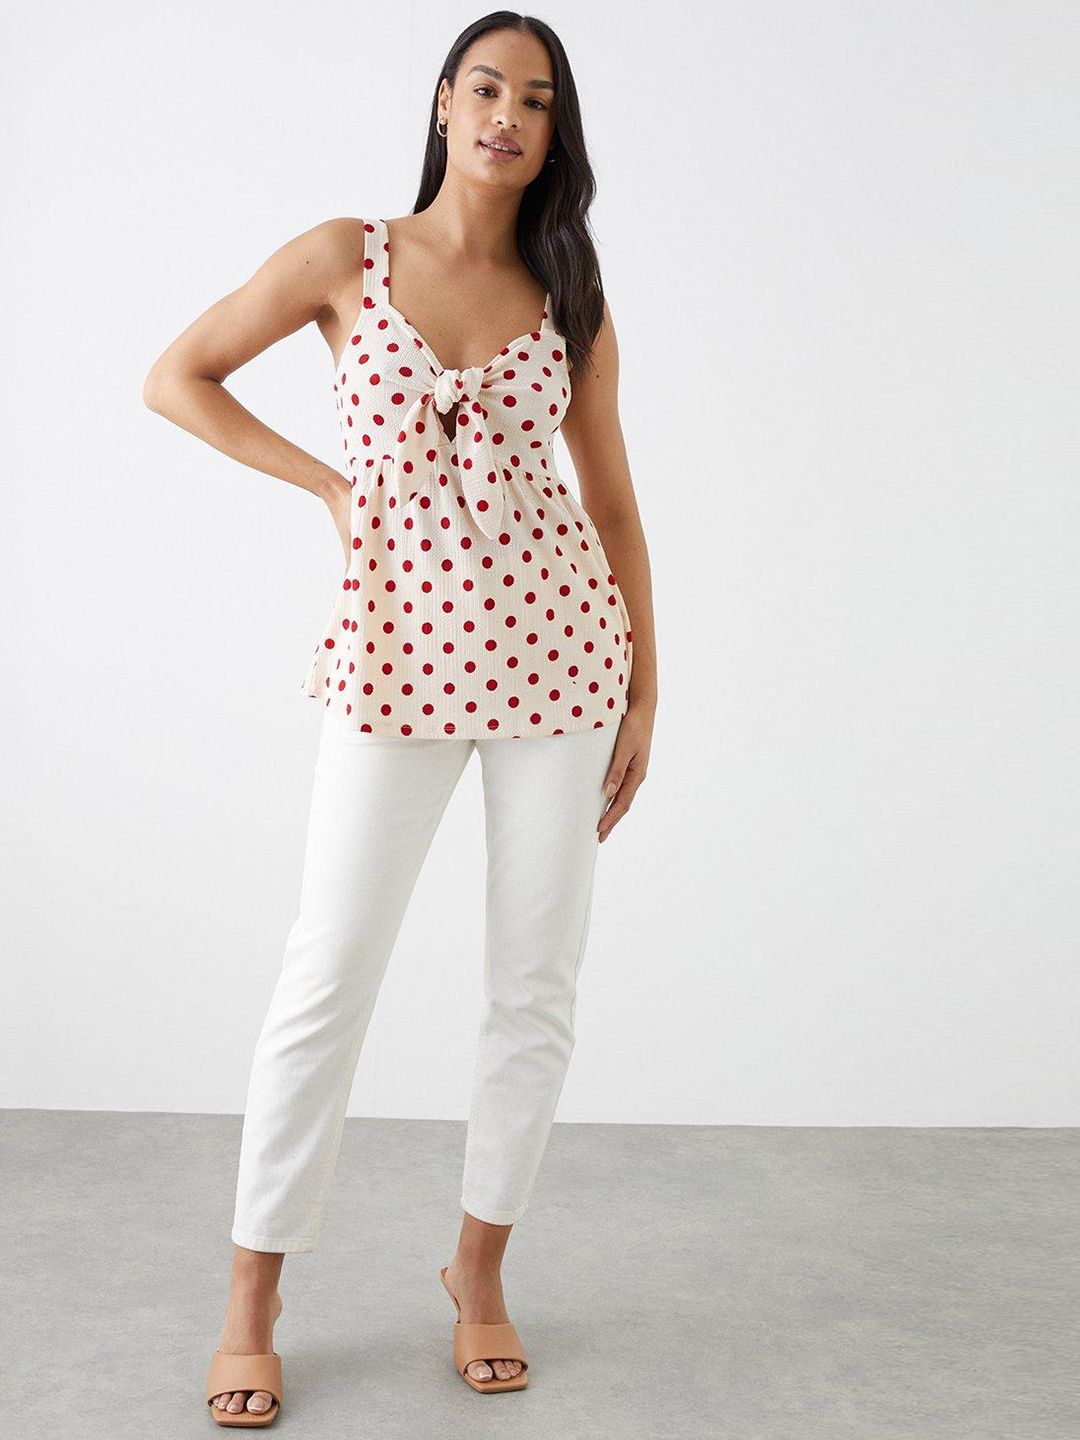 DOROTHY PERKINS Polka Dot Print Front Knot Top Price in India